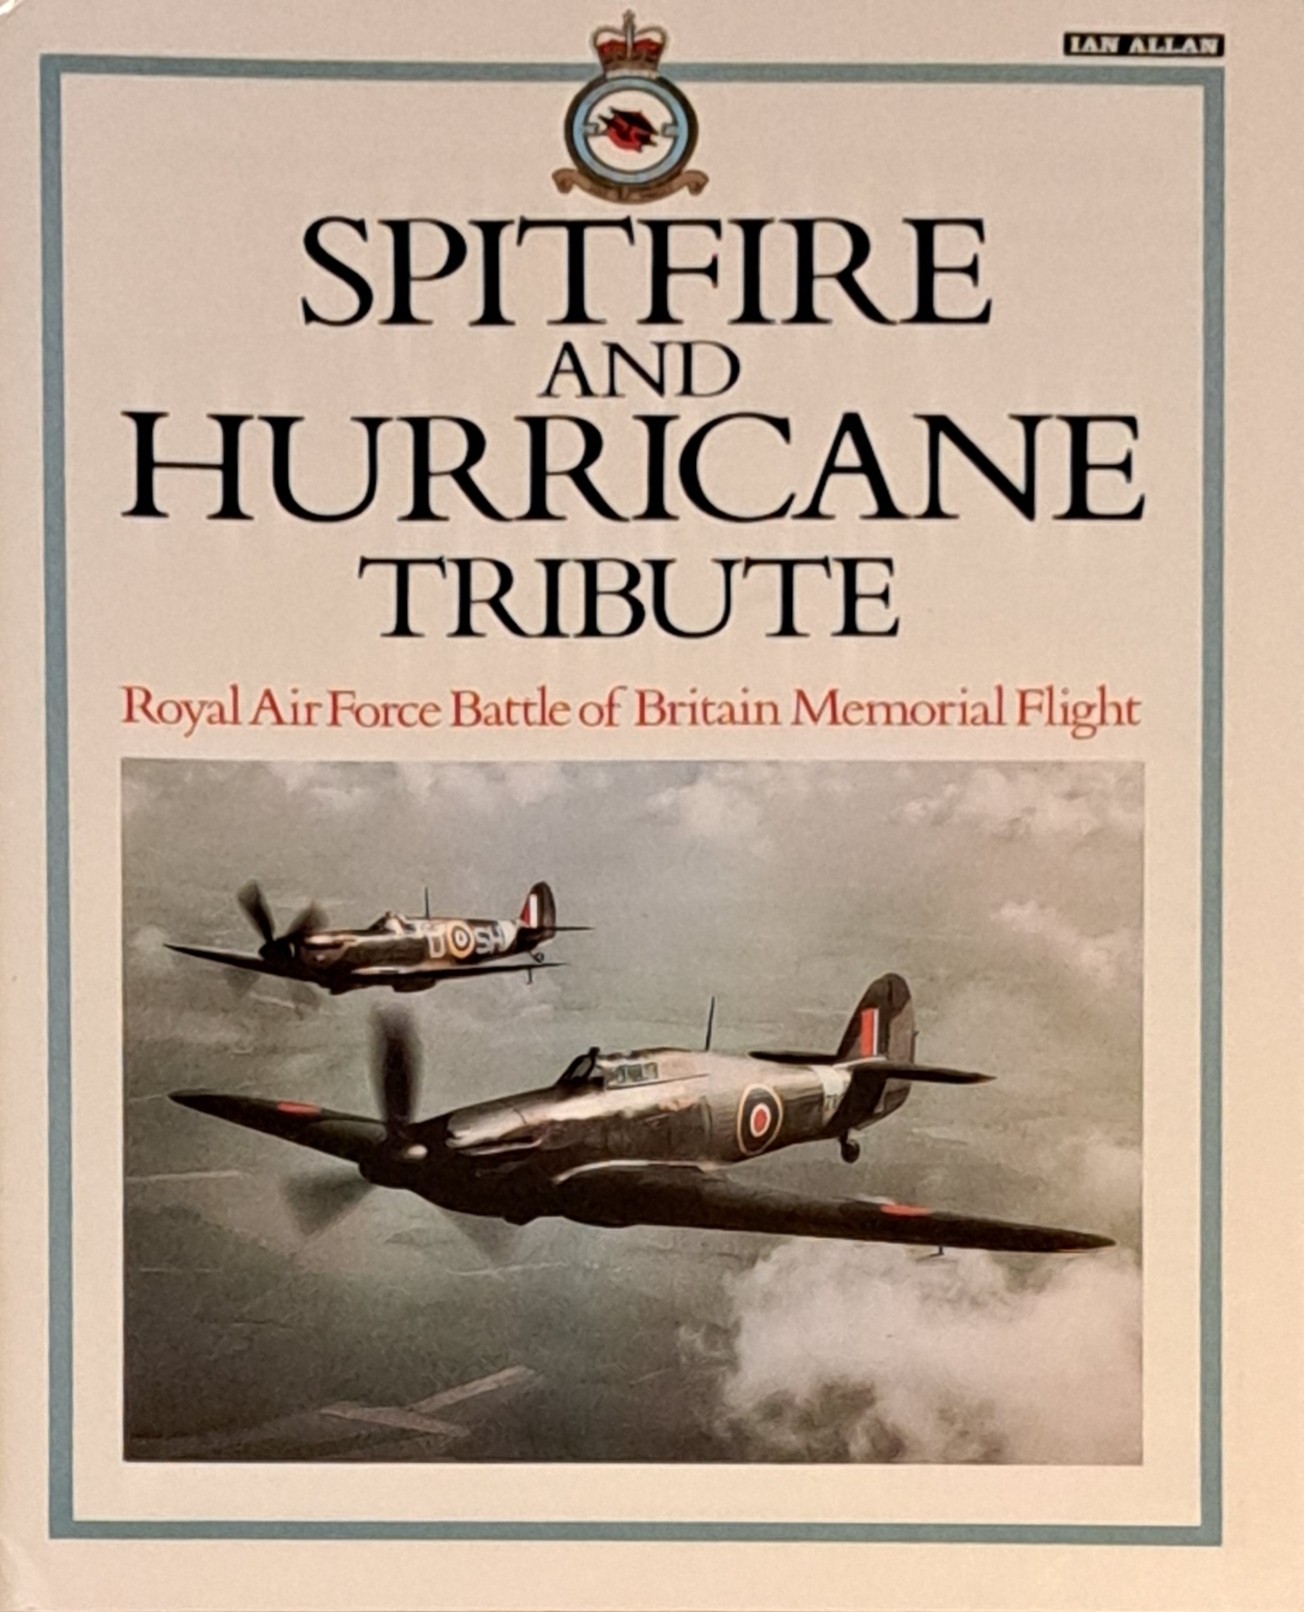 Spitfire and Hurricane tribute